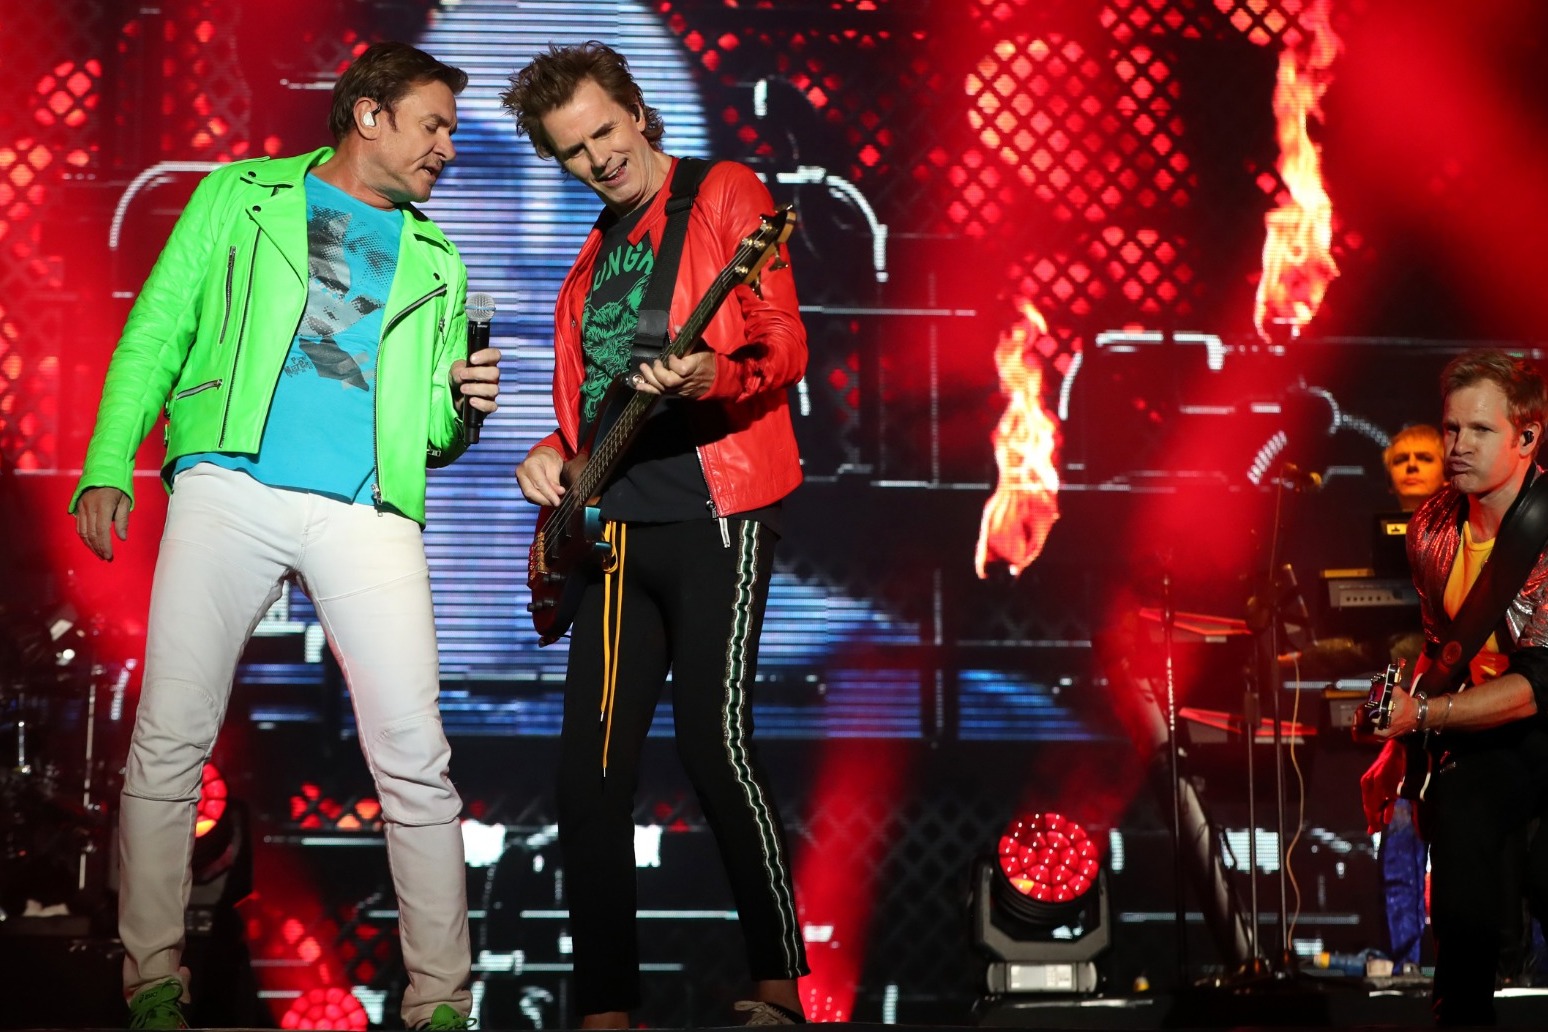 Duran Duran’s John Taylor: New documentary film captures authentic moment 